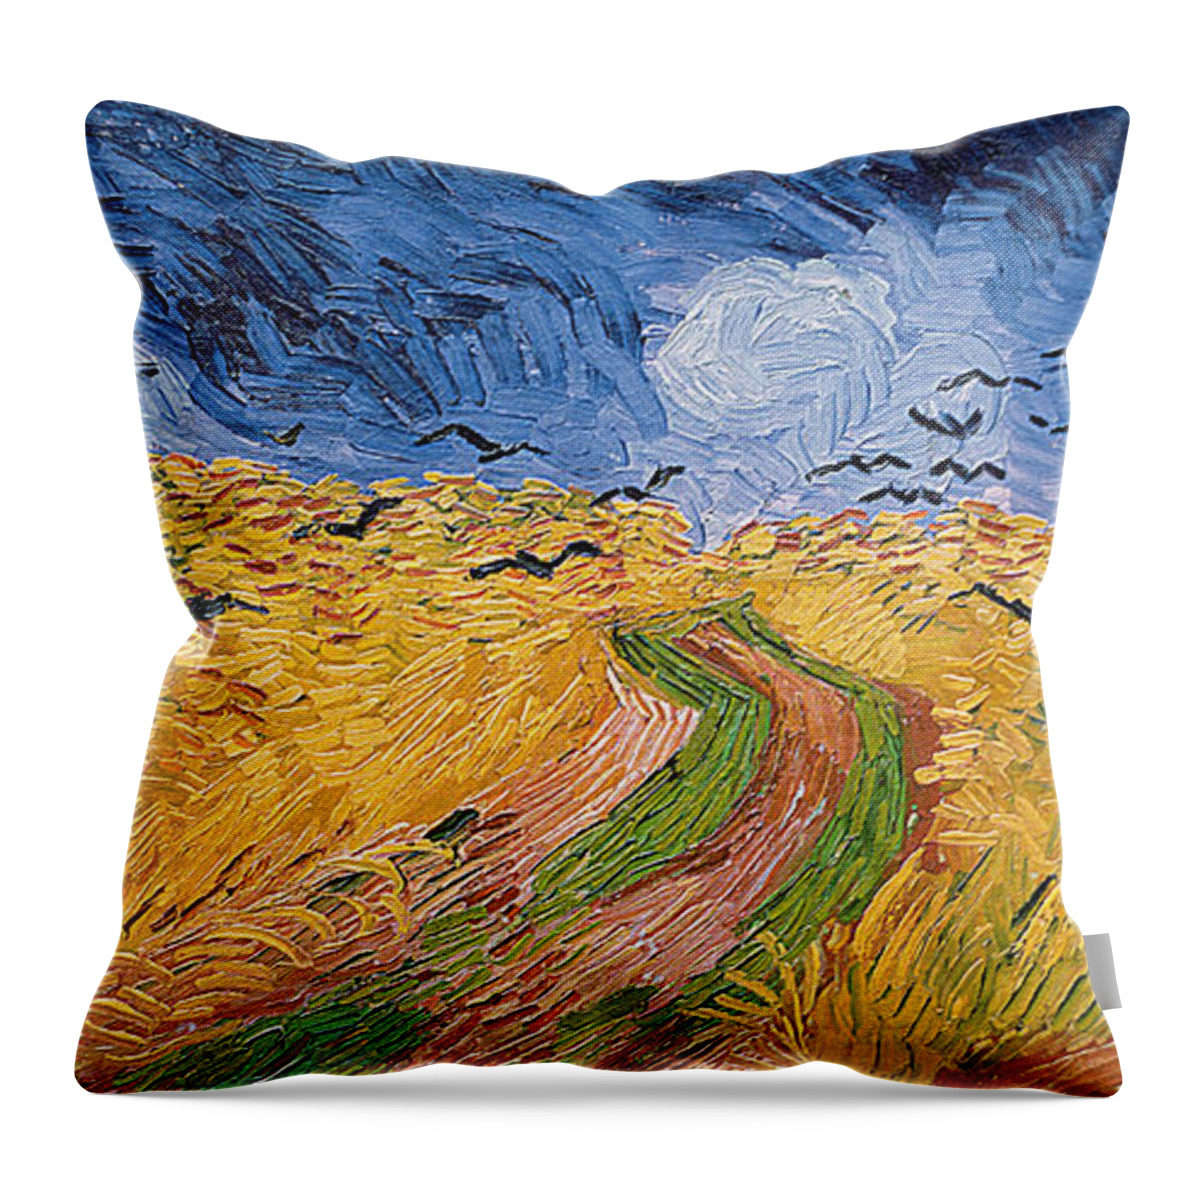 Landscape;post-impressionist; Summer; Wheat; Field; Birds; Threatening; Sky; Cloud; Post-impressionism Throw Pillow featuring the painting Wheatfield with Crows by Vincent van Gogh